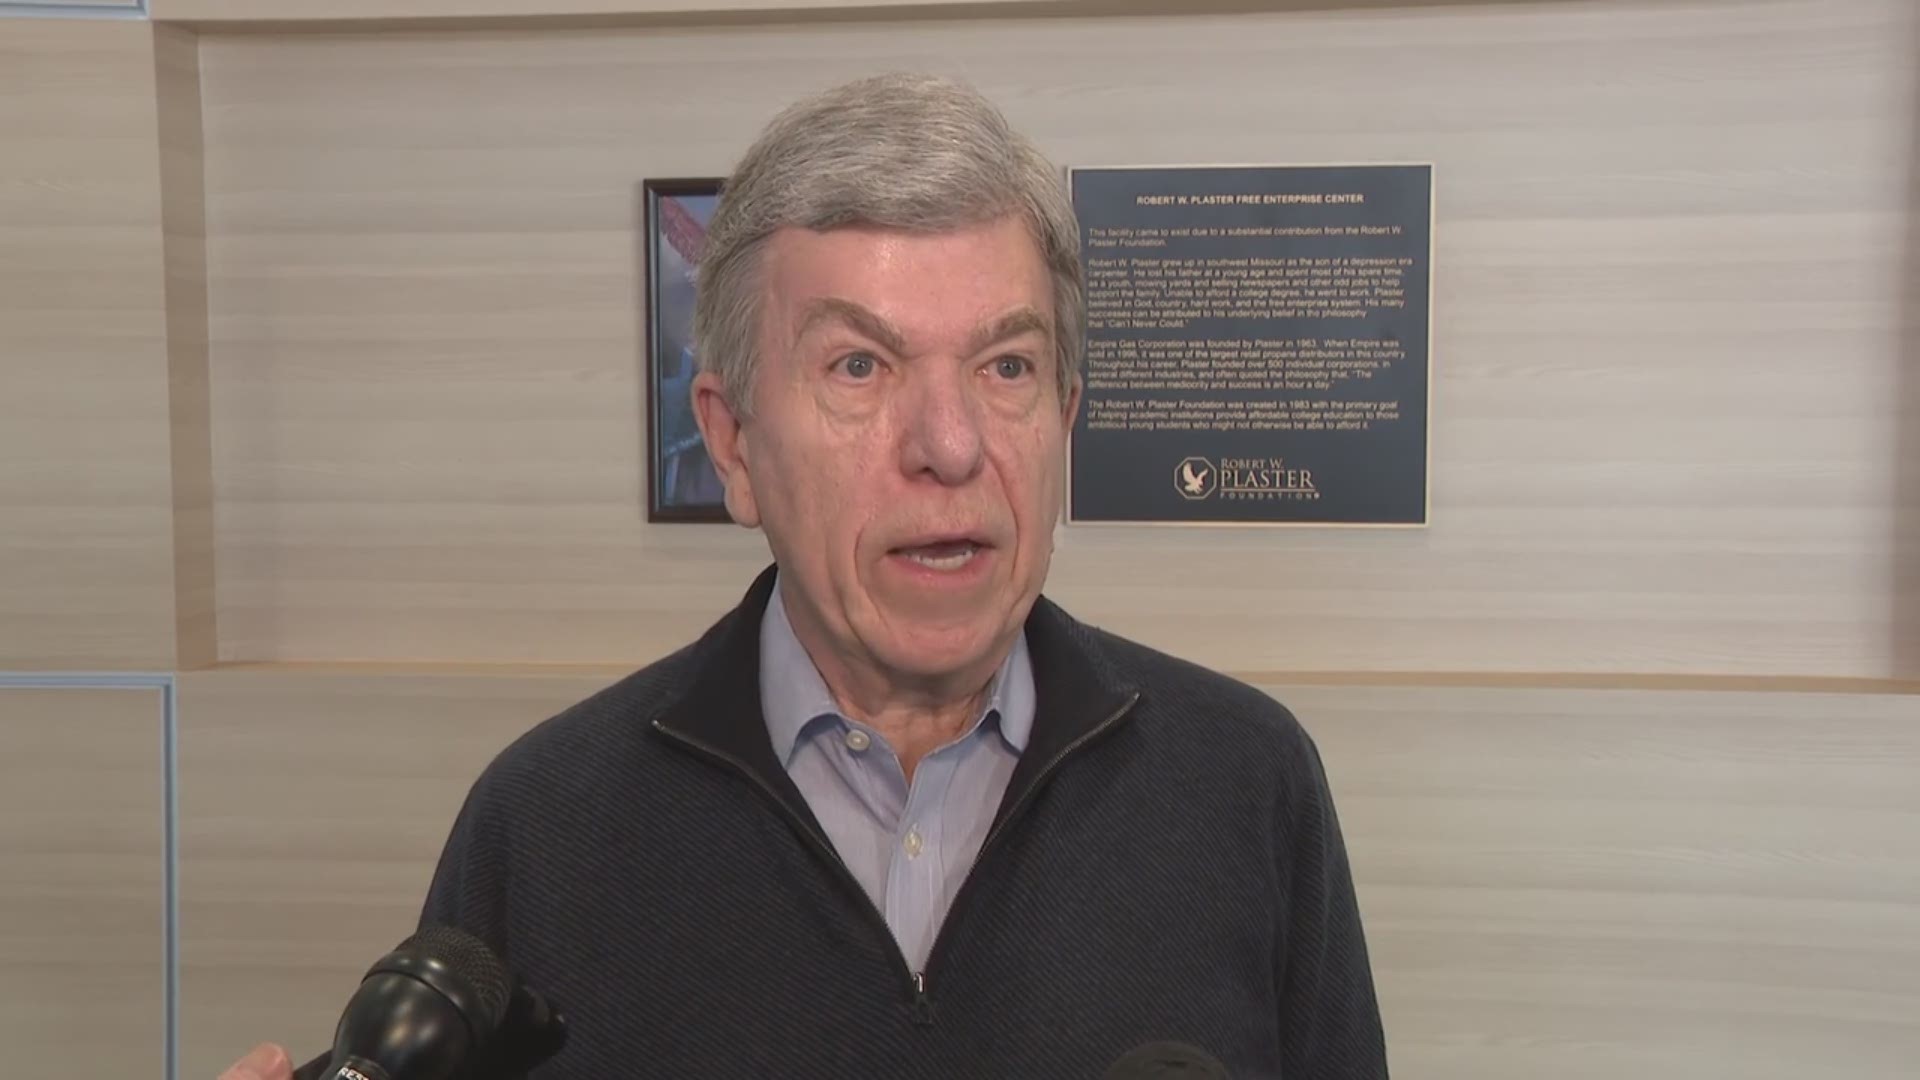 Sen. Roy Blunt talked about technical careers as a way to avoid what he calls the "lost decade." He also answered questions on some headlines out of Washington.